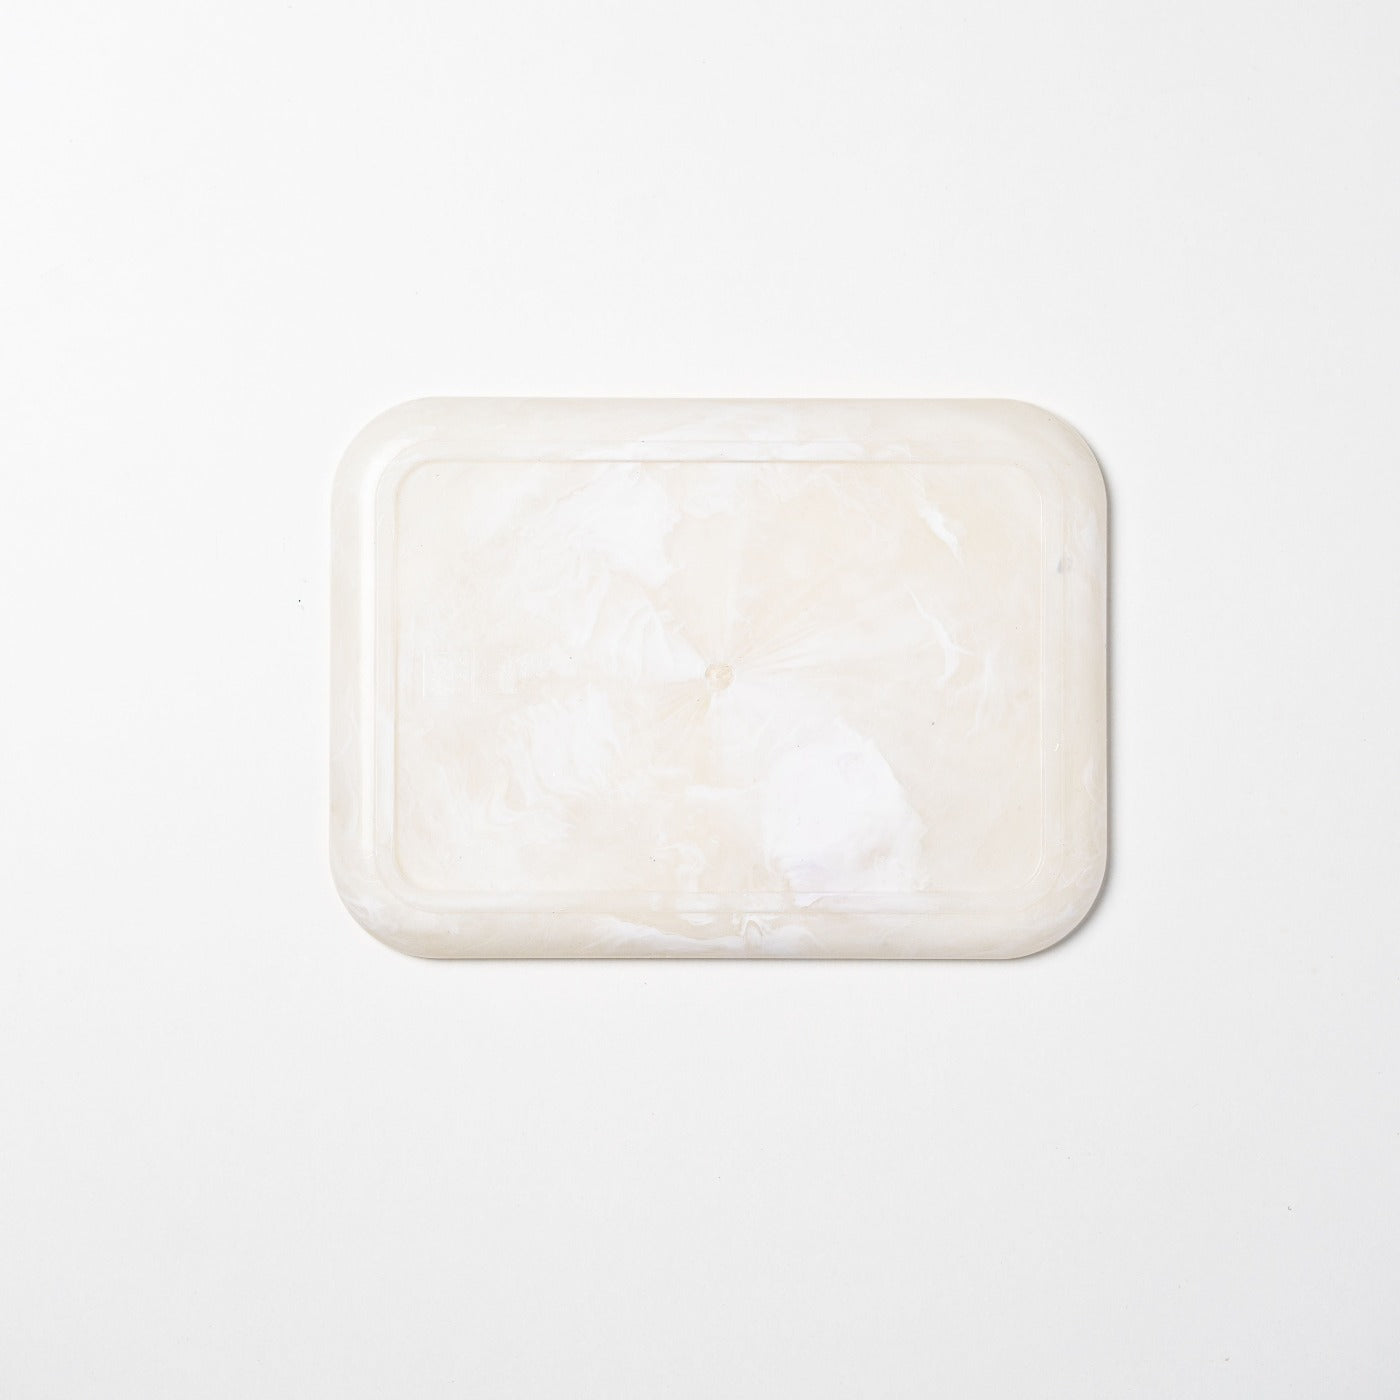 Recycled tray by yod and co in white